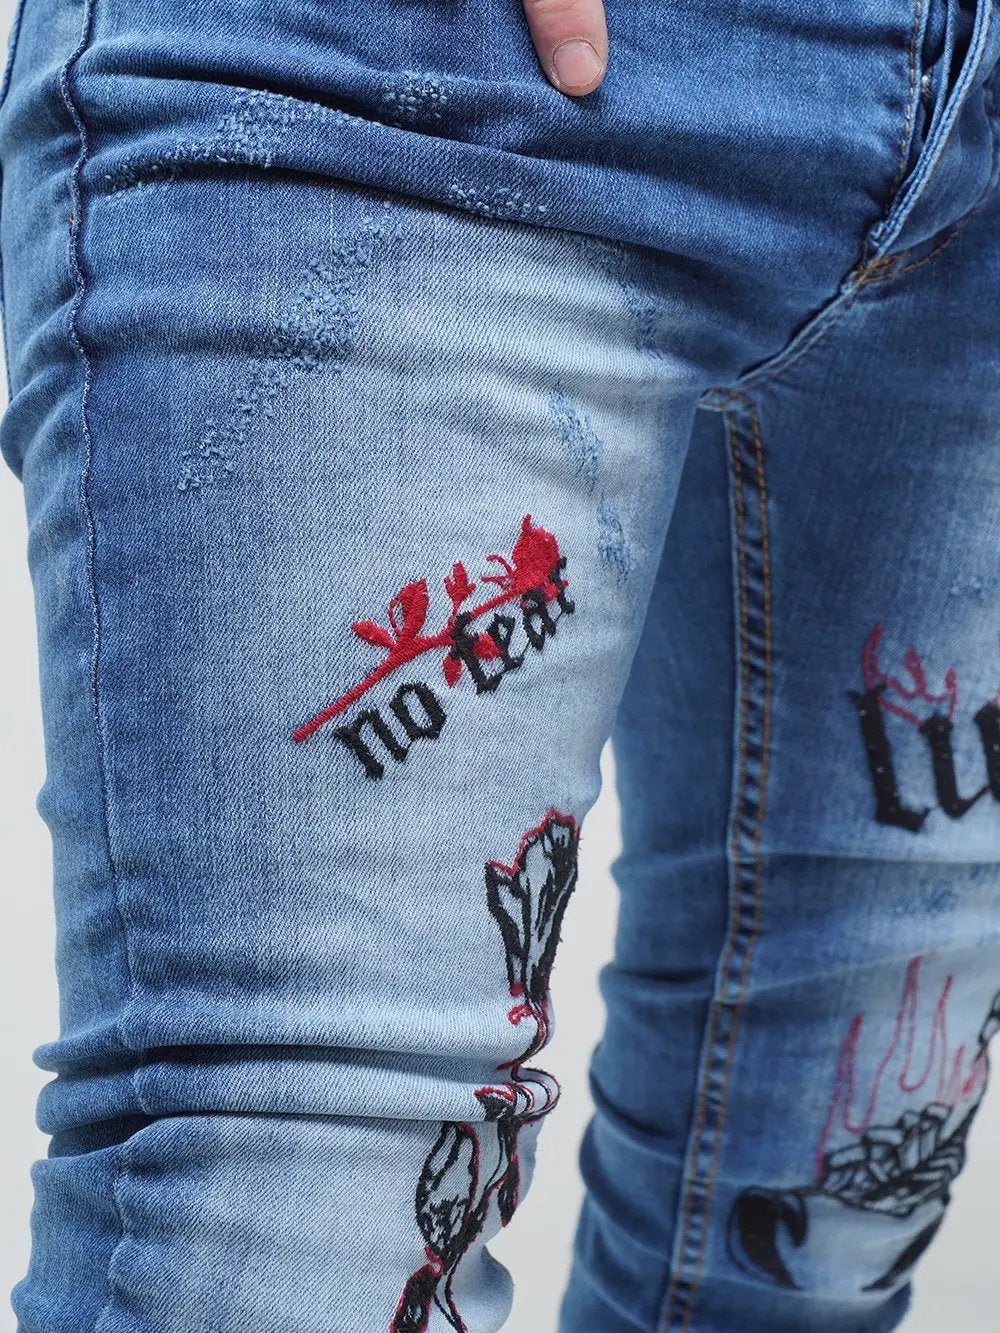 Lower body shot of a man wearing ROSE TATTOO skinny jeans 